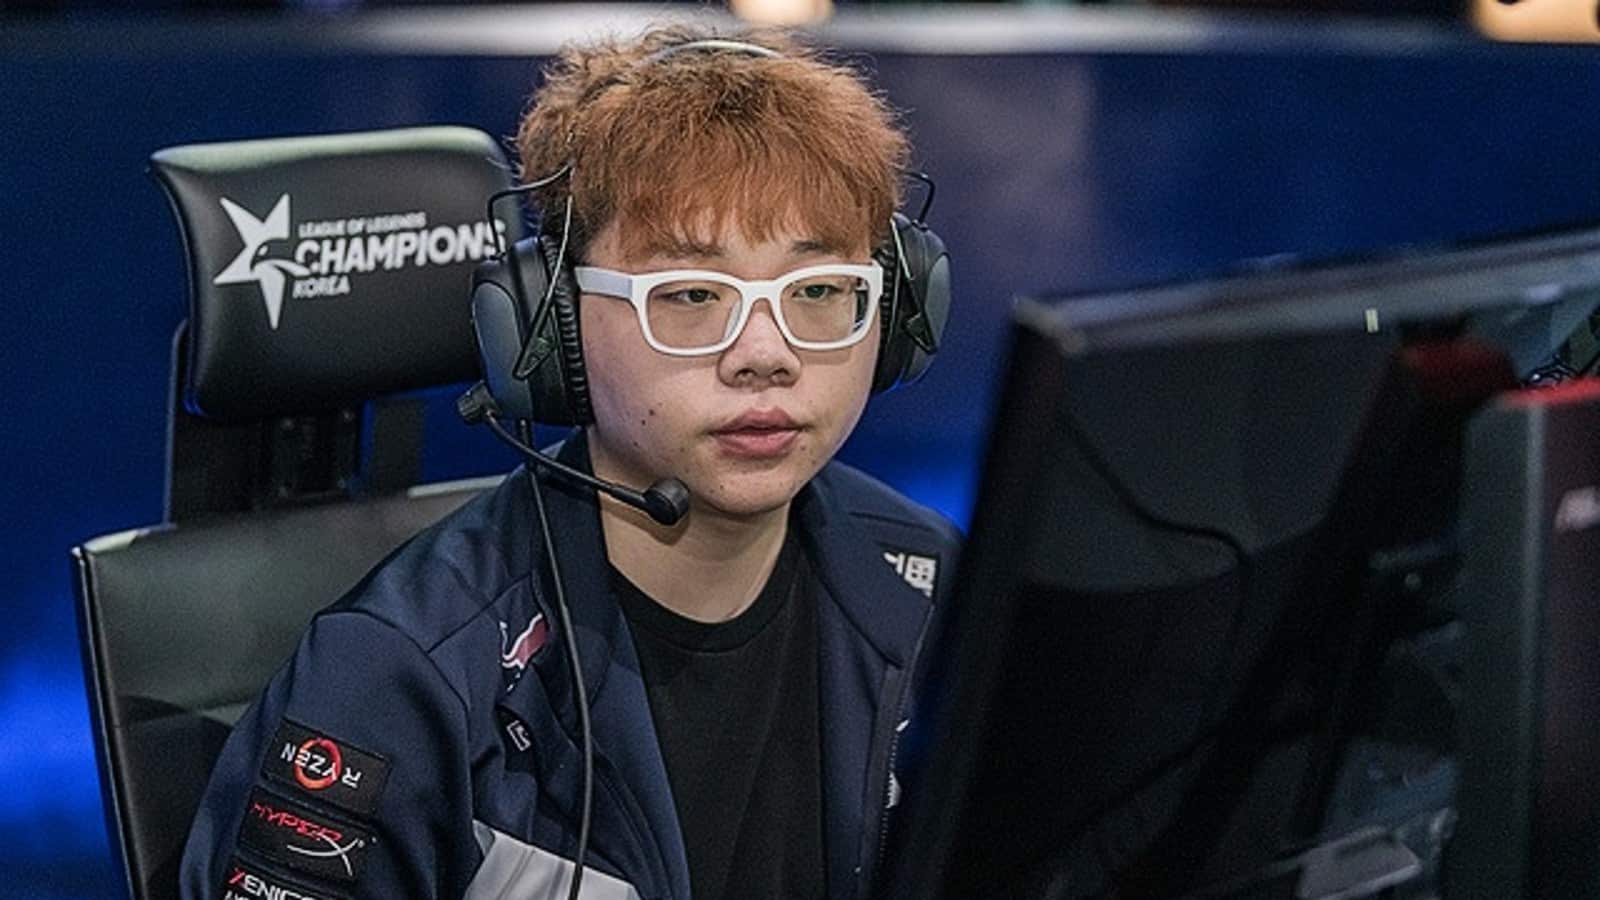 PawN competing in the LCK in 2019